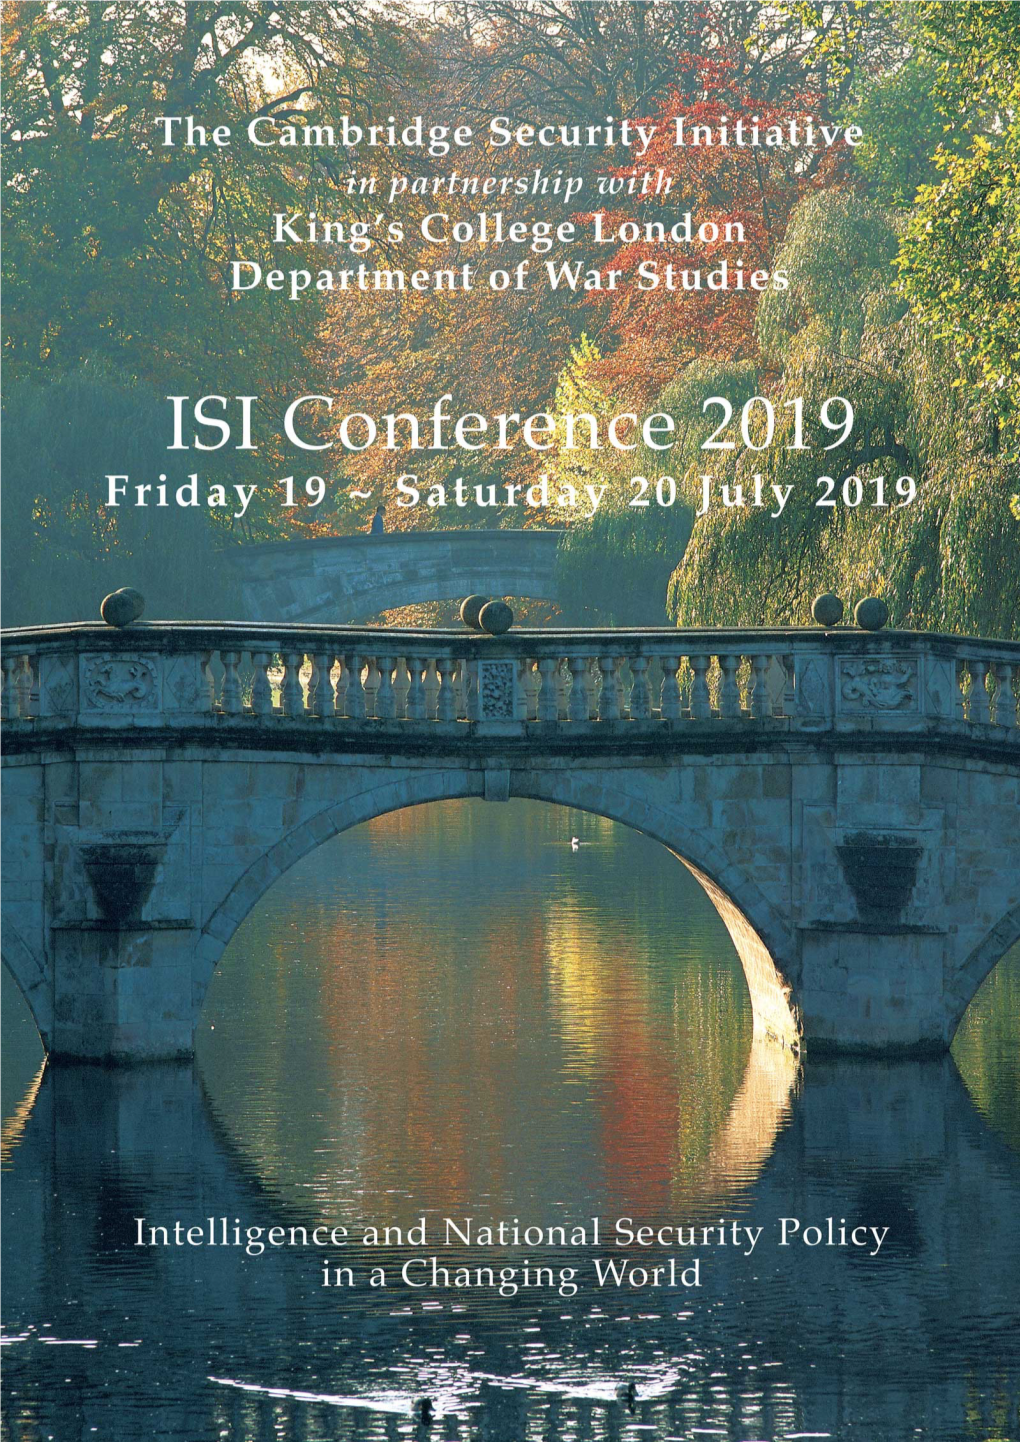 ISI-Conference-2019-Brochure.Pdf